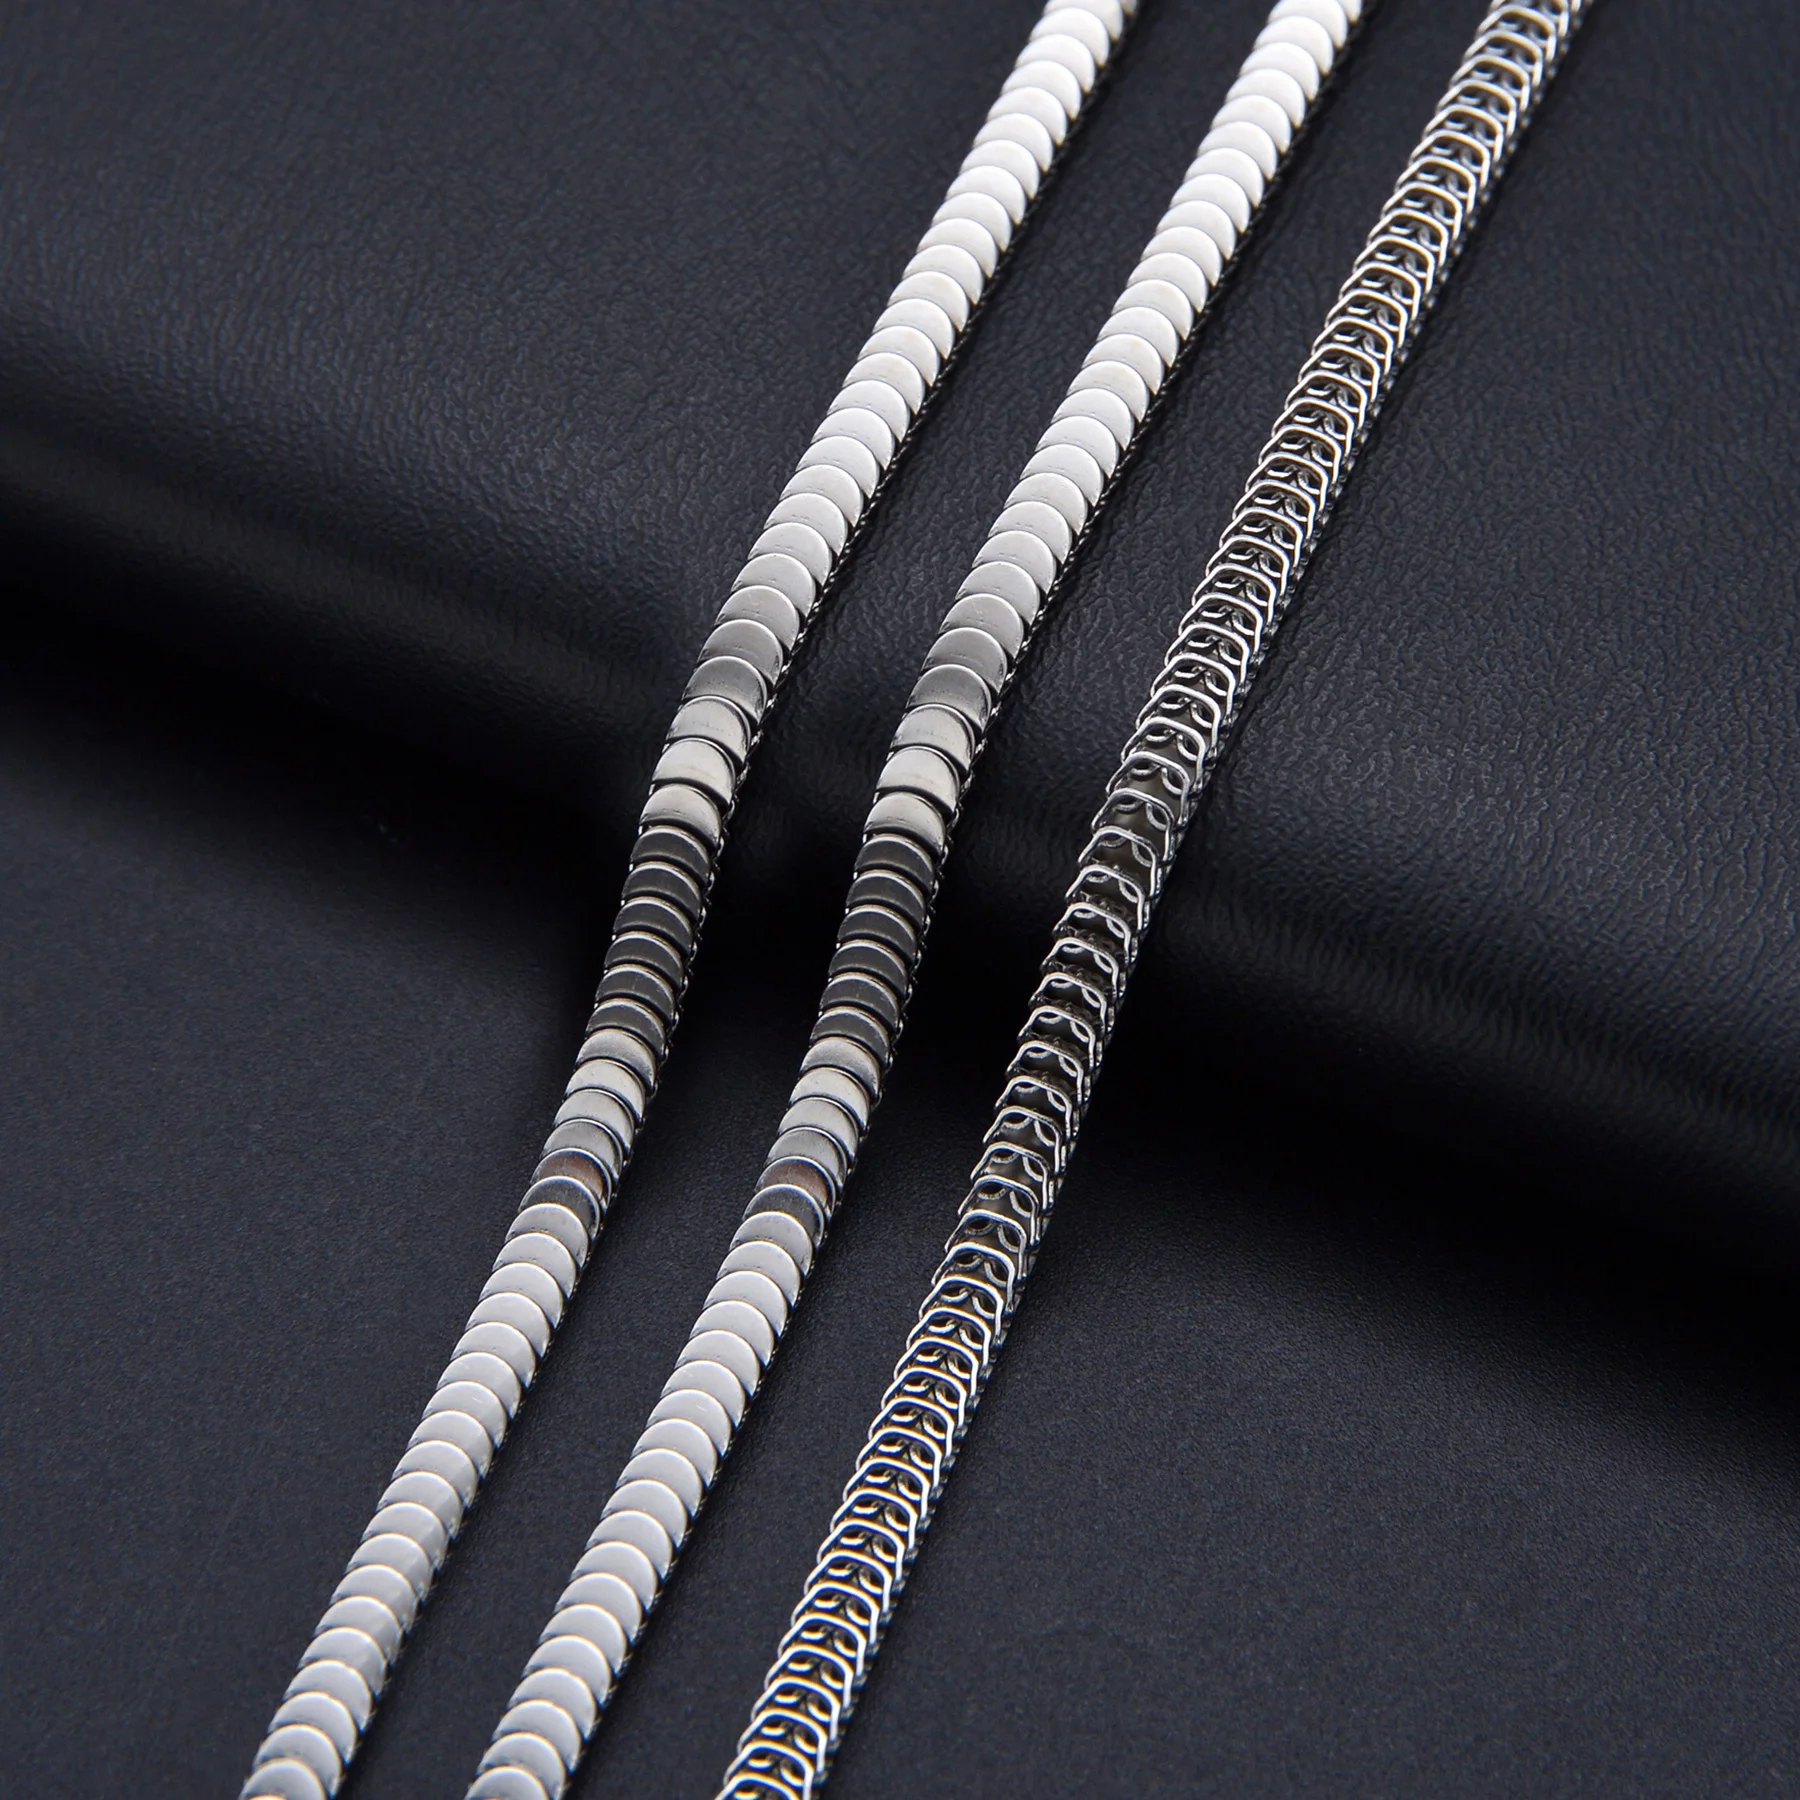 

Width 4mm Fish Scales Chain Necklace Stainless Steel Fashion Men And Women Jewelry Various Length Wholesale